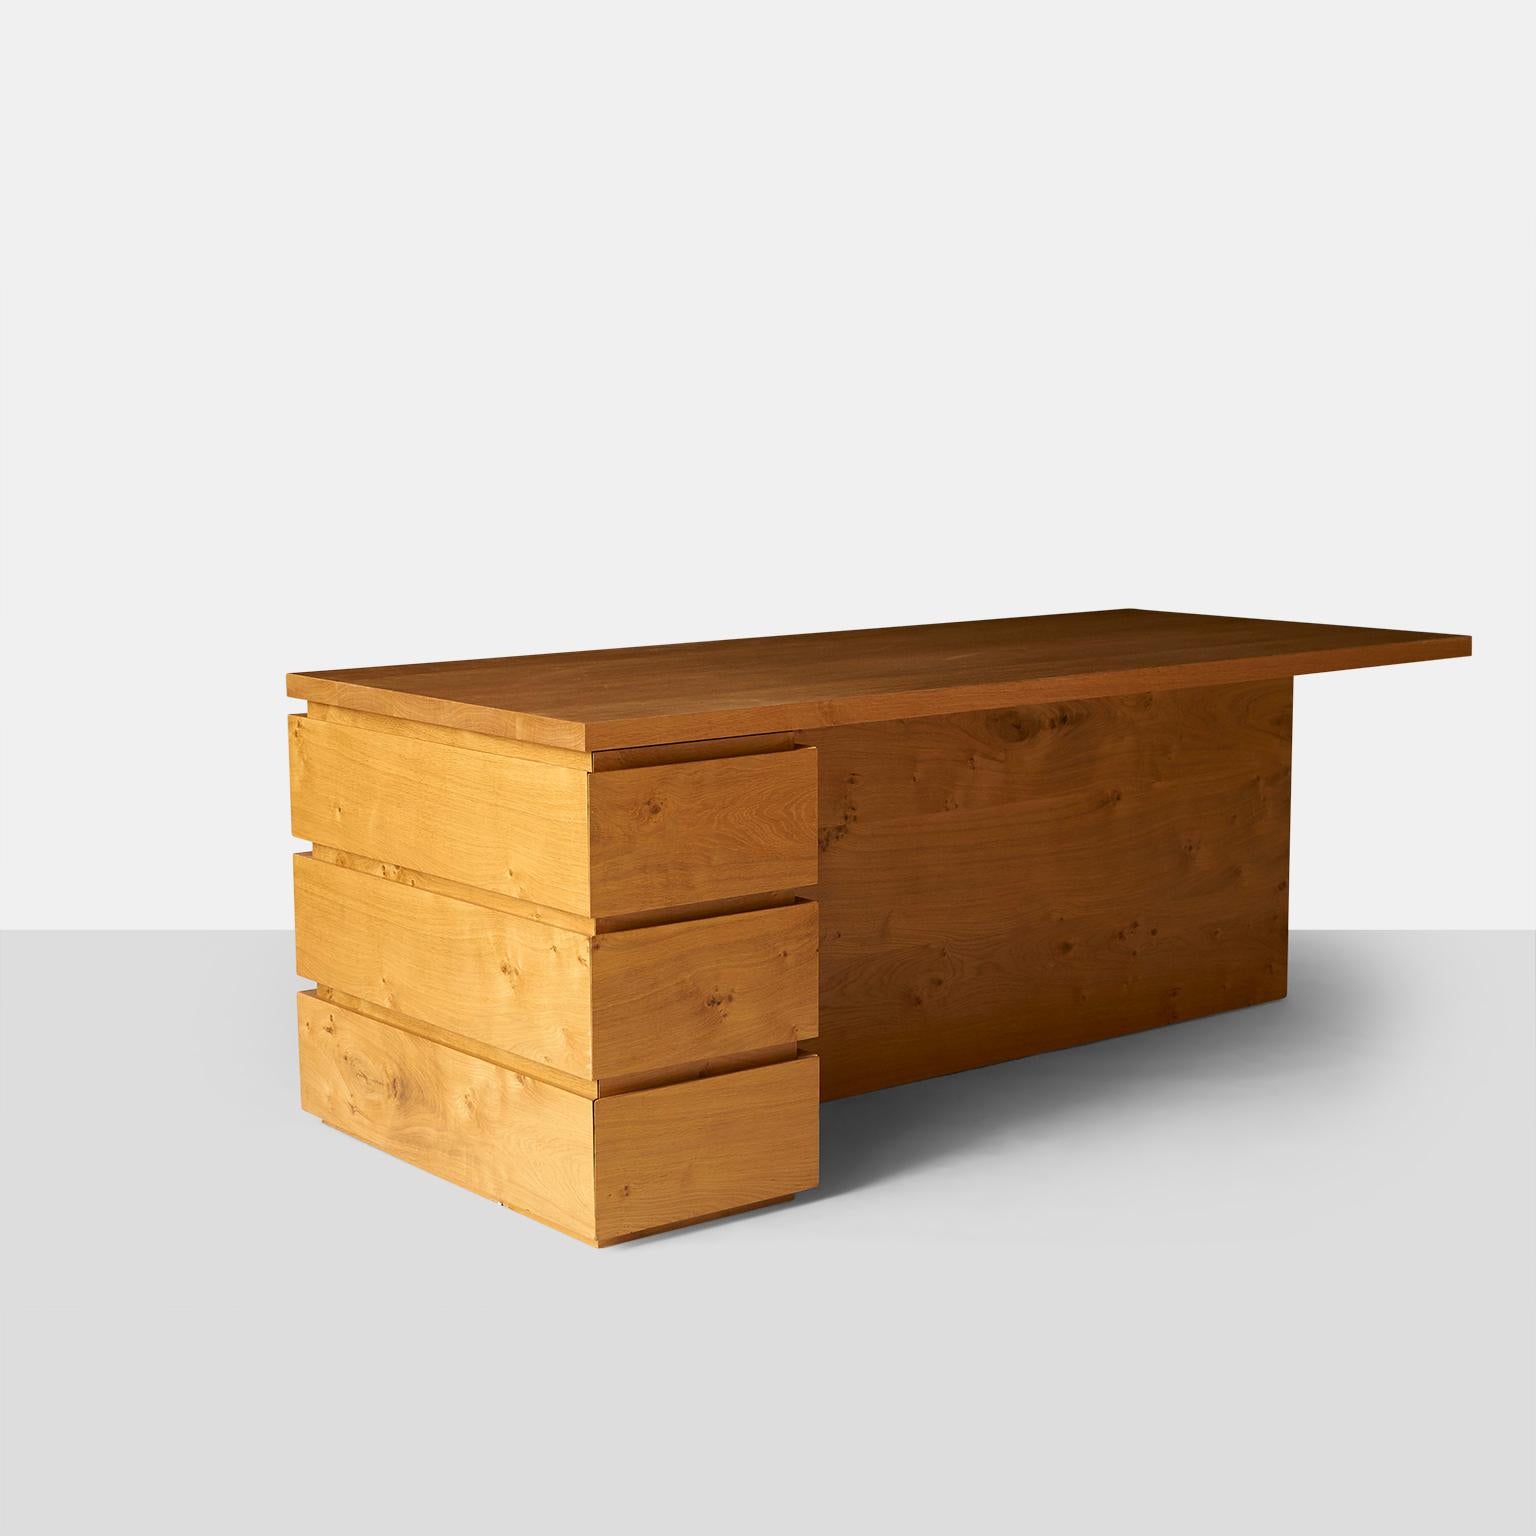 John Pawson Minimalist desk
A one of a kind partners desk by John Pawson. Solid oak top with base made of solid elm. Partners style desk with three drawers on one side and a single door cabinet on the other. Clean minimal styling and highest